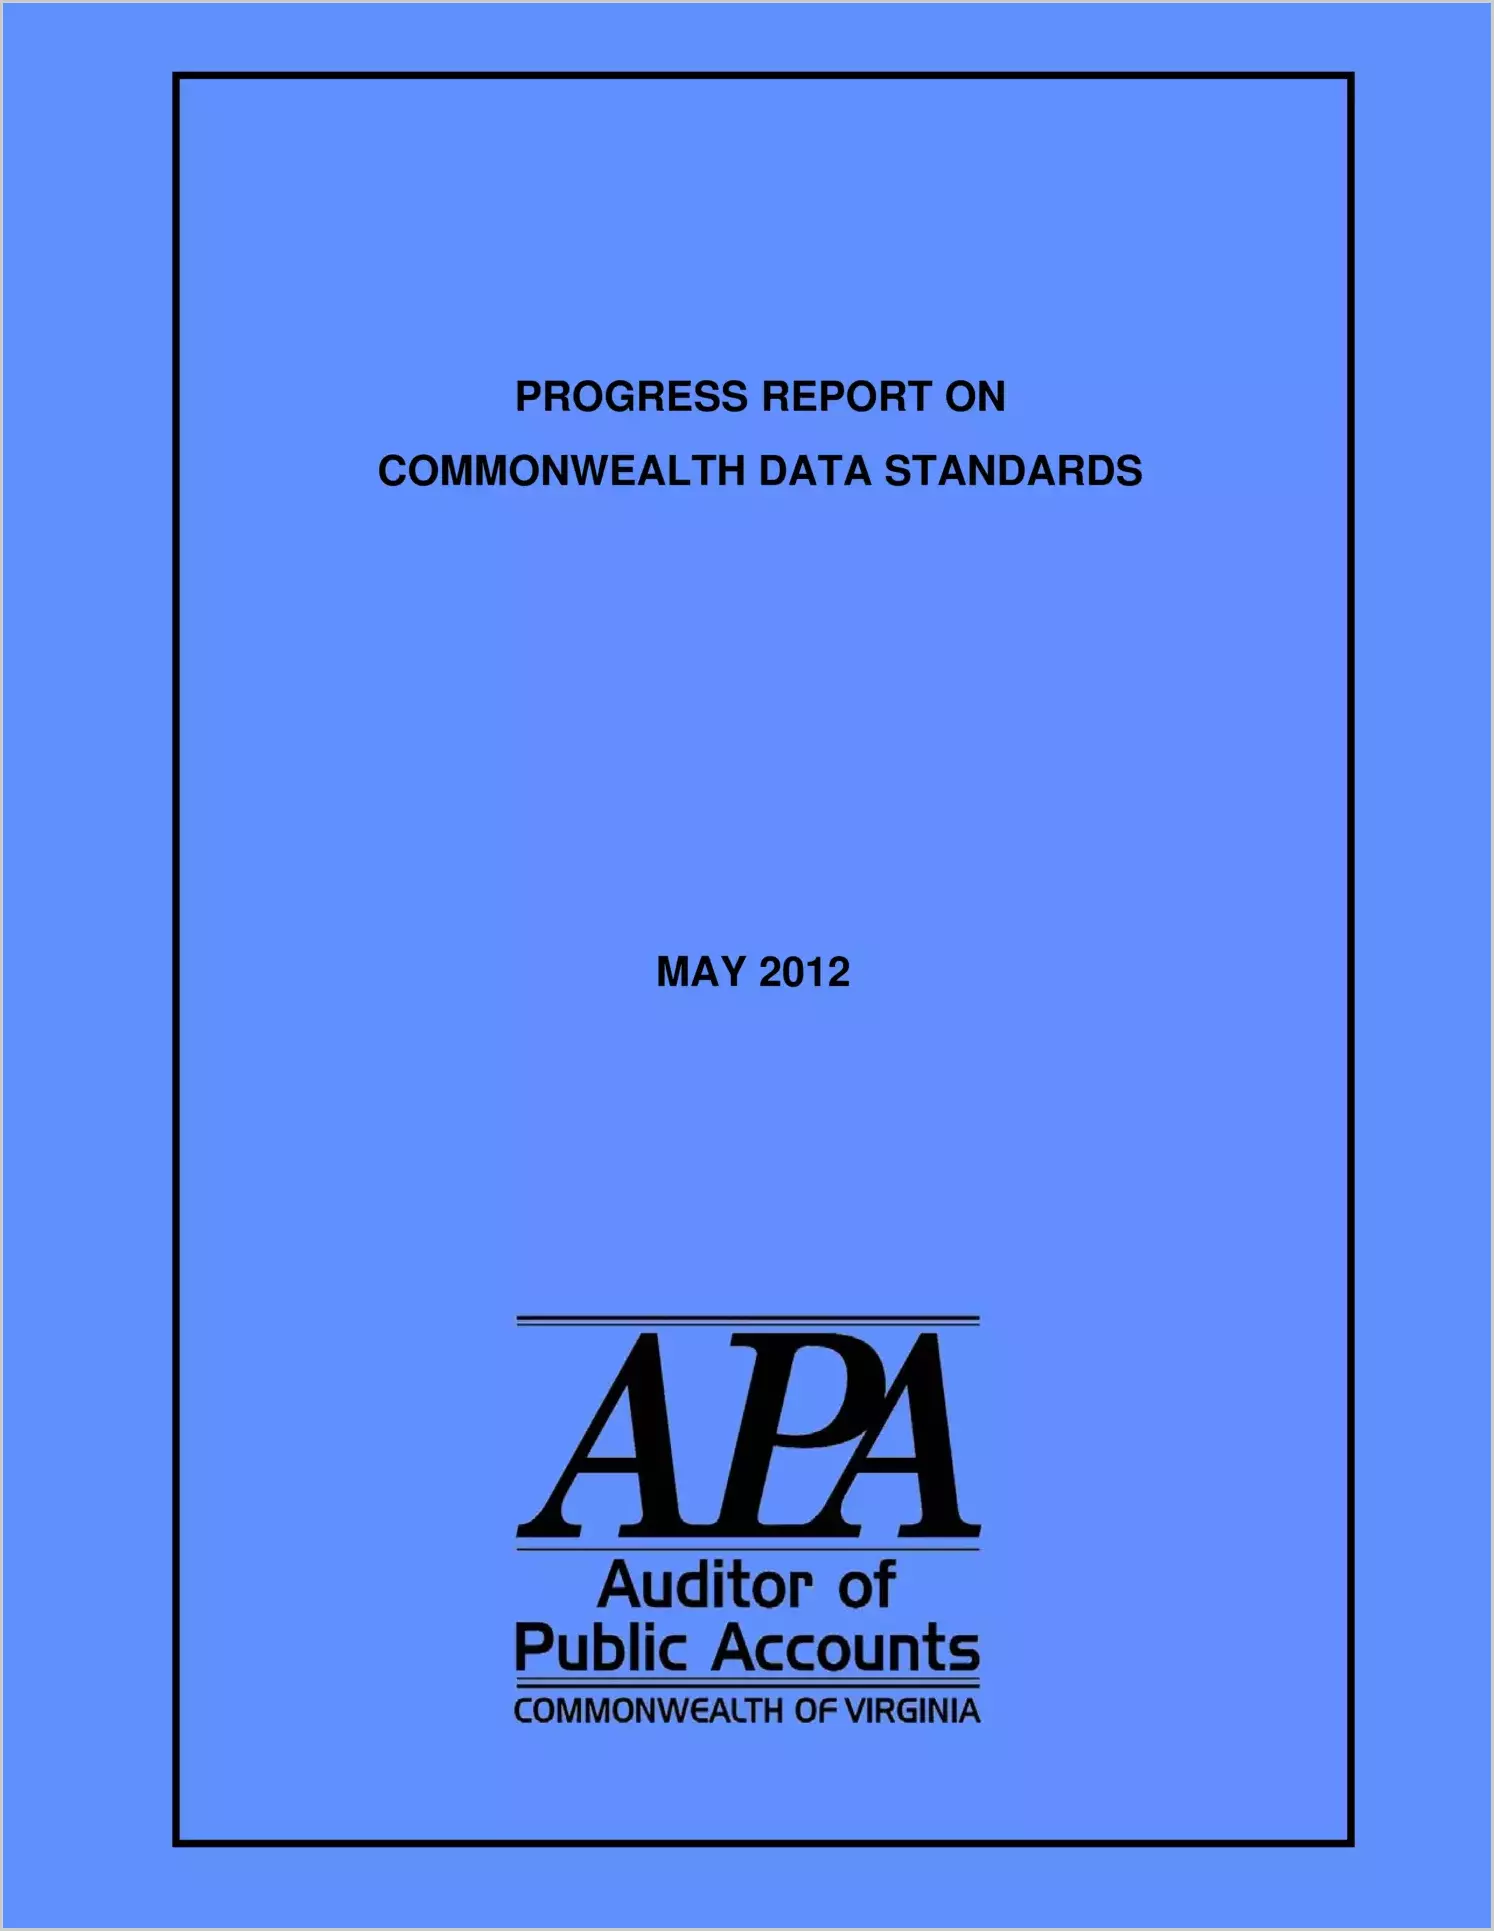 Progress Report on Commonwealth Data Standards as of May 2012